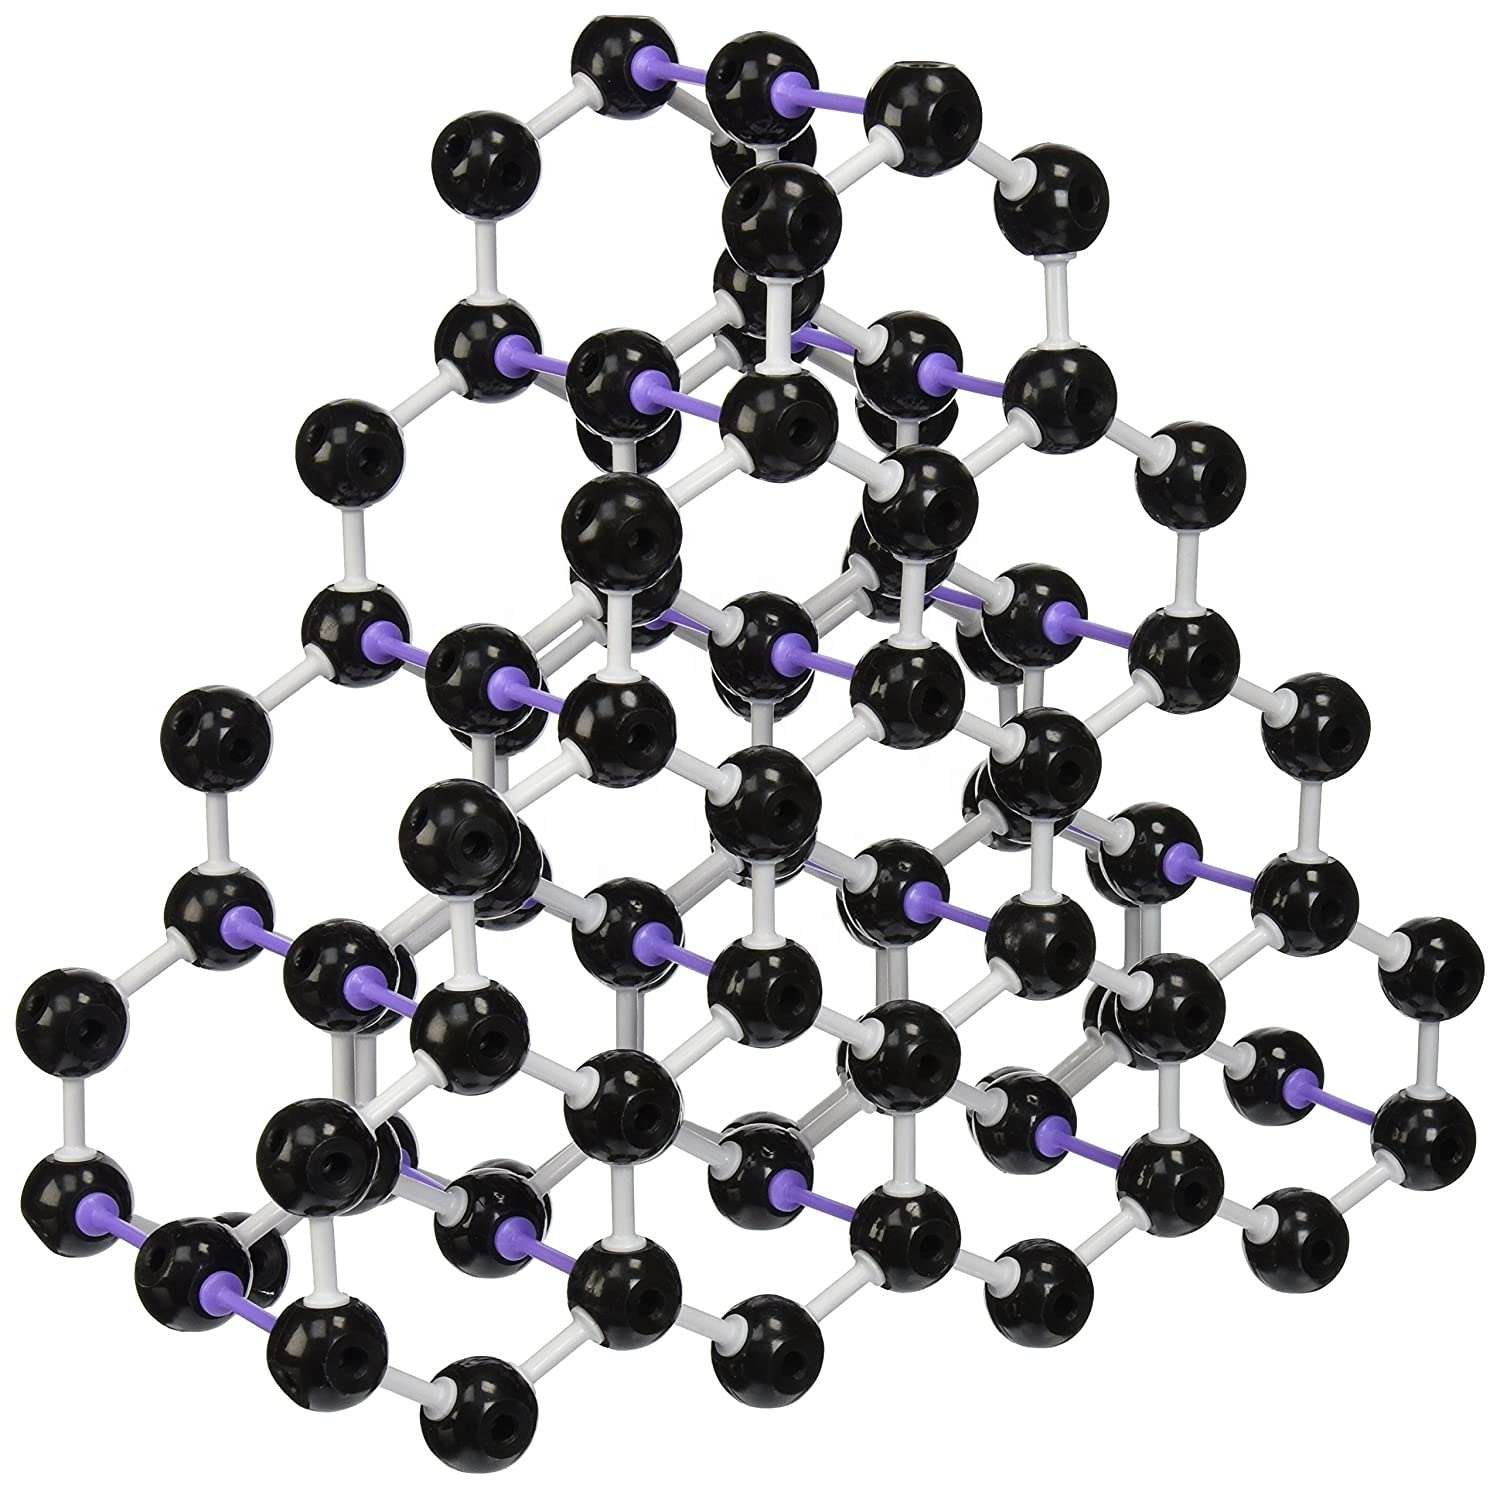 Chemical Graphite Crystal Structure Molecular Models